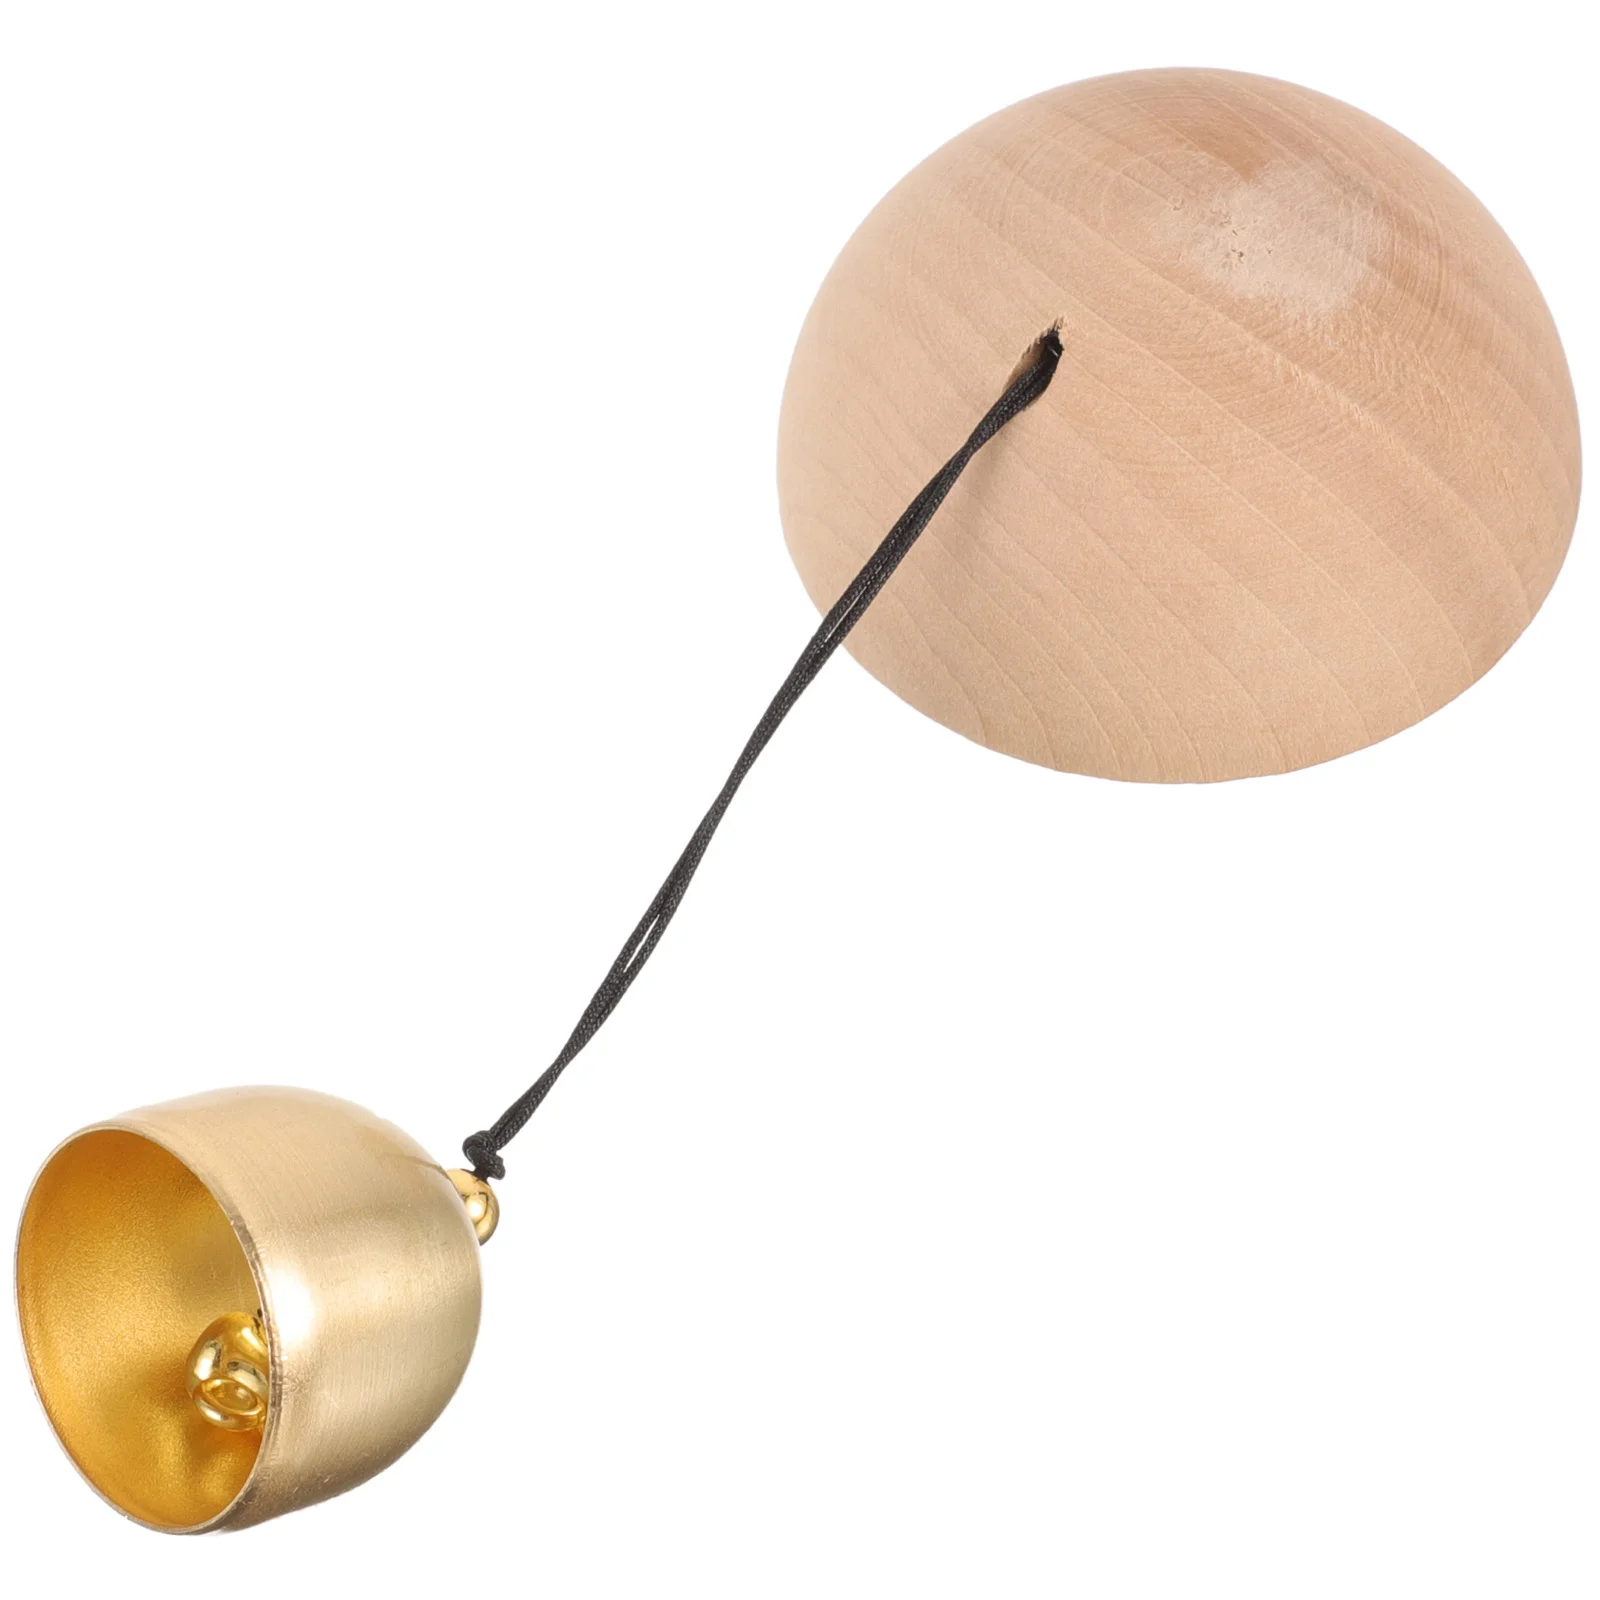 

Shopkeepers Bell Wooden Hanging Bell Wall Mounted Metal Ring Business Entry Office Store Door Alert Chime Decoration